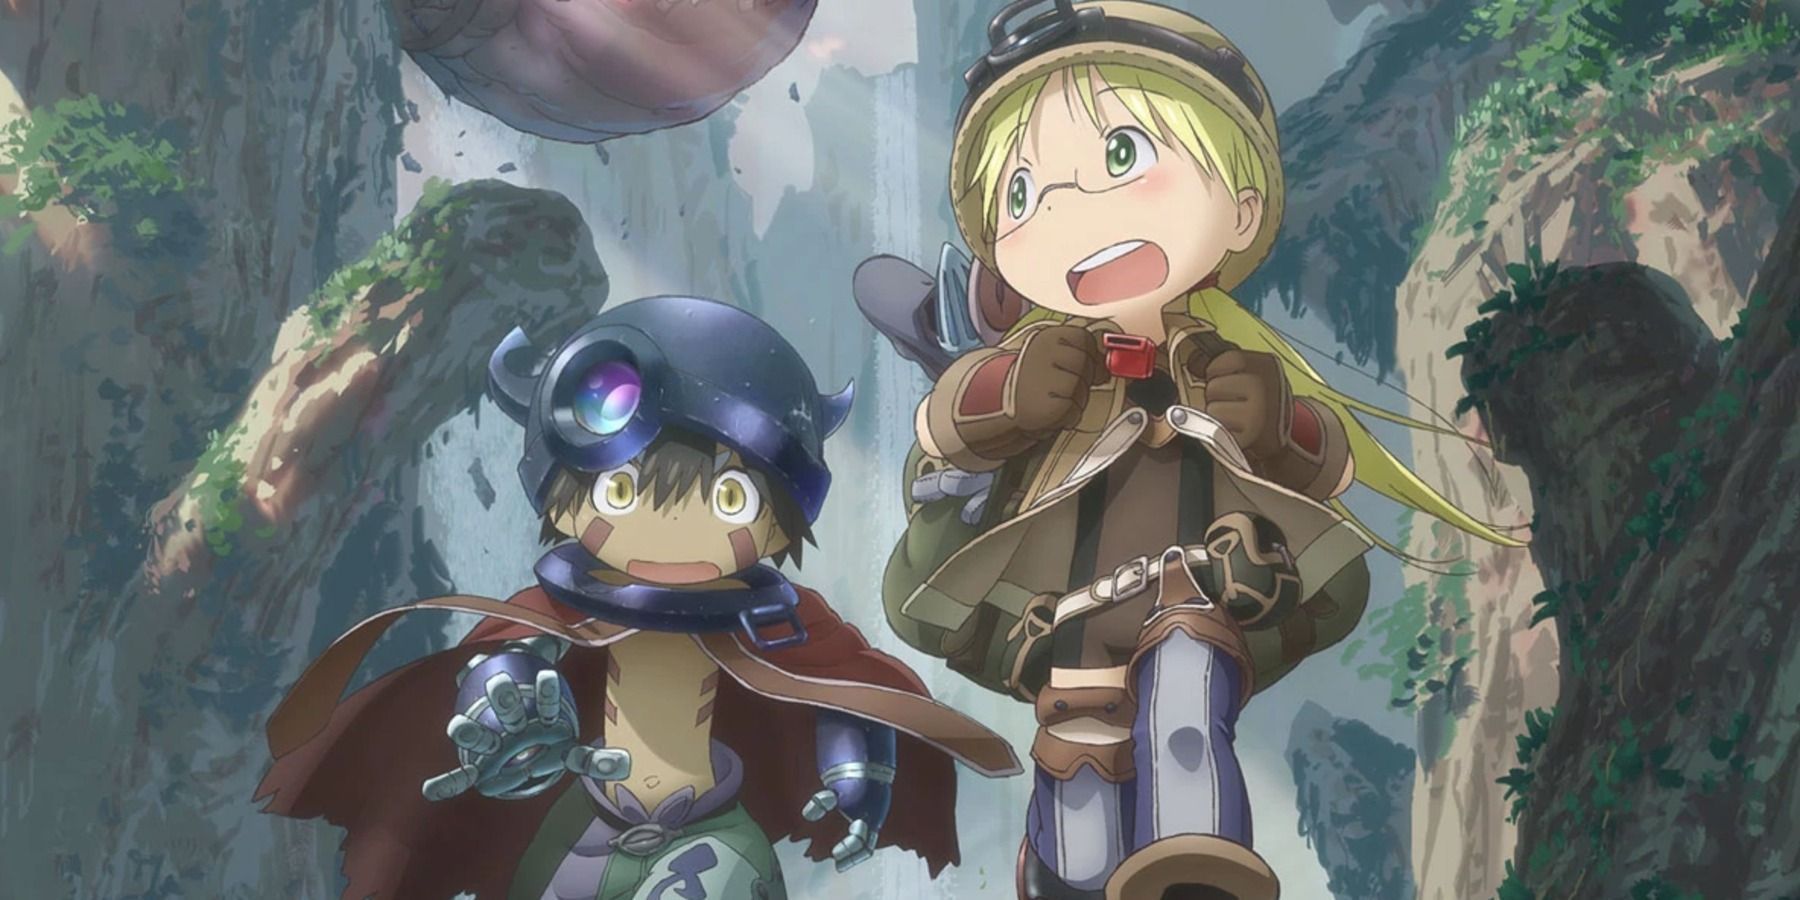 Made in Abyss promo